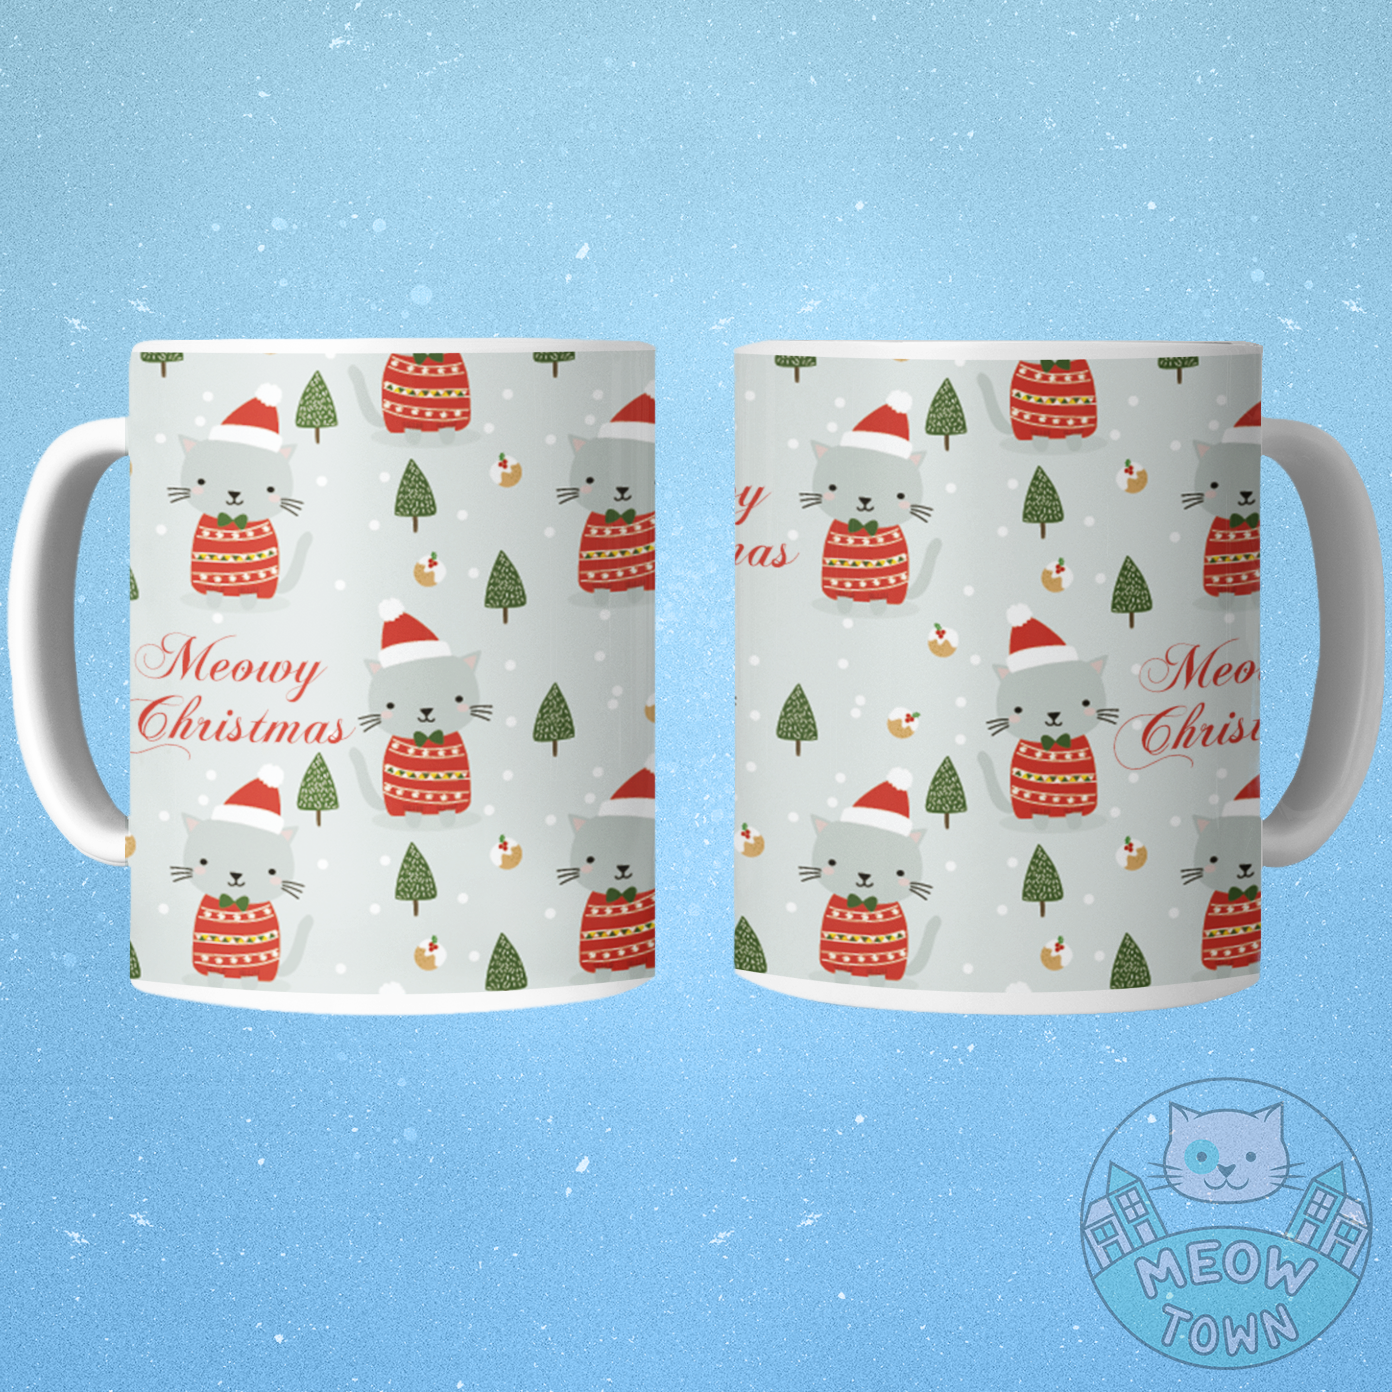 A lovely Christmas themed ceramic mug from our exclusive Meow Town Special collection. Sip your favourite hot drink from this stylish coffee mug, printed with festive kitty design. Cartoon style kitties in cute santa hats. Meowy Christmas slogan.  This mug can be a perfect Christmas gift for any cat lover!